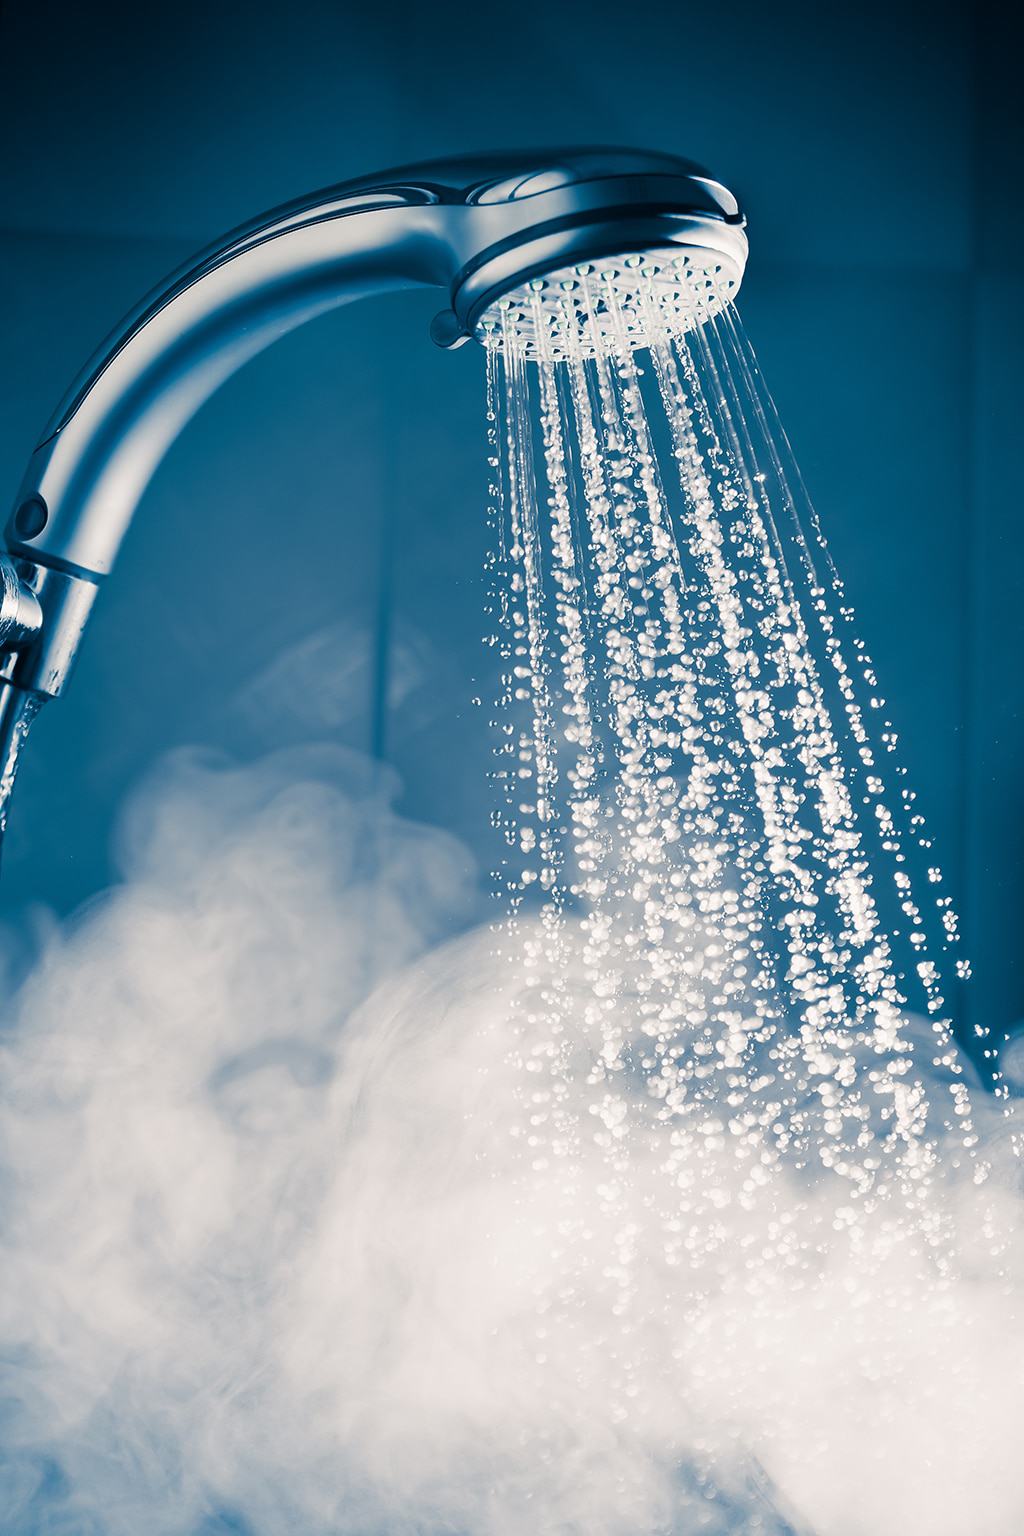 Water Heater Repair Keeps Floods At Bay and Ensures Warm Relaxing Showers | Portland, OR